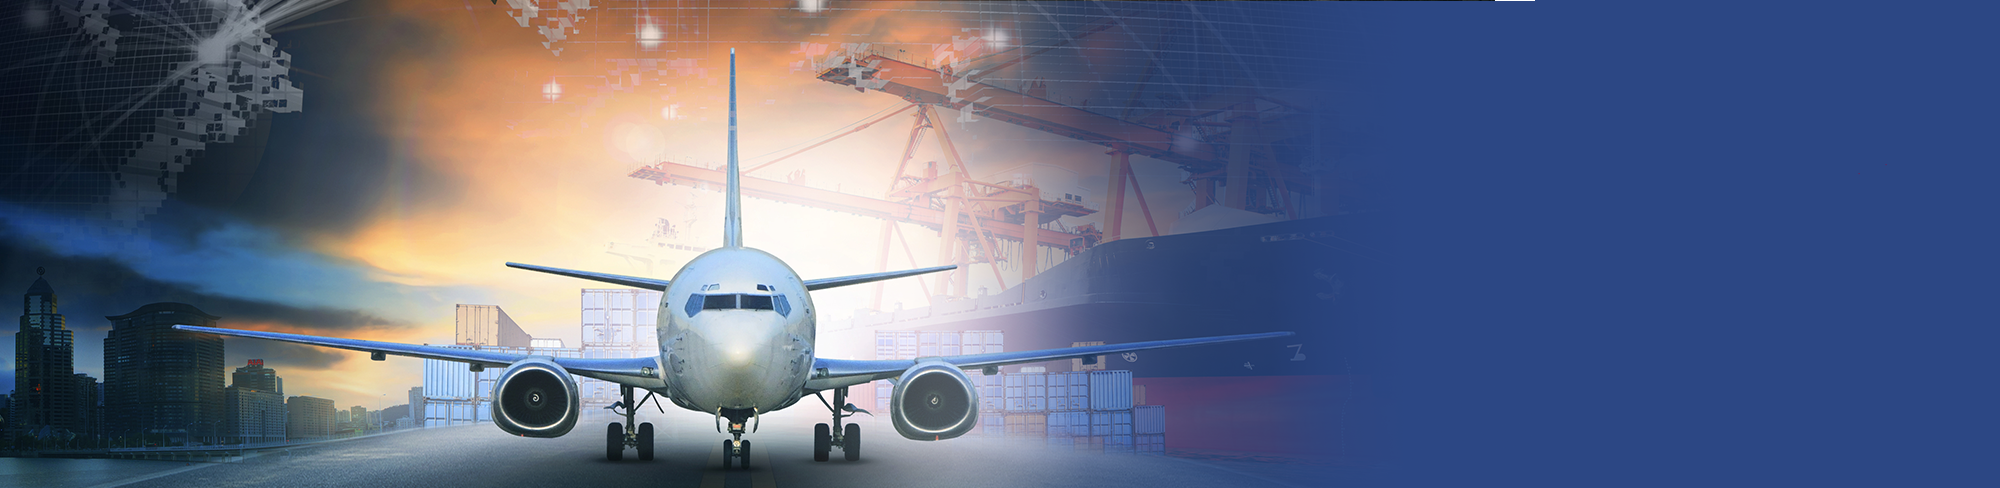 Implementation and adaptation of the paperless document management information system in the field of air cargo transportation (e-Freight)